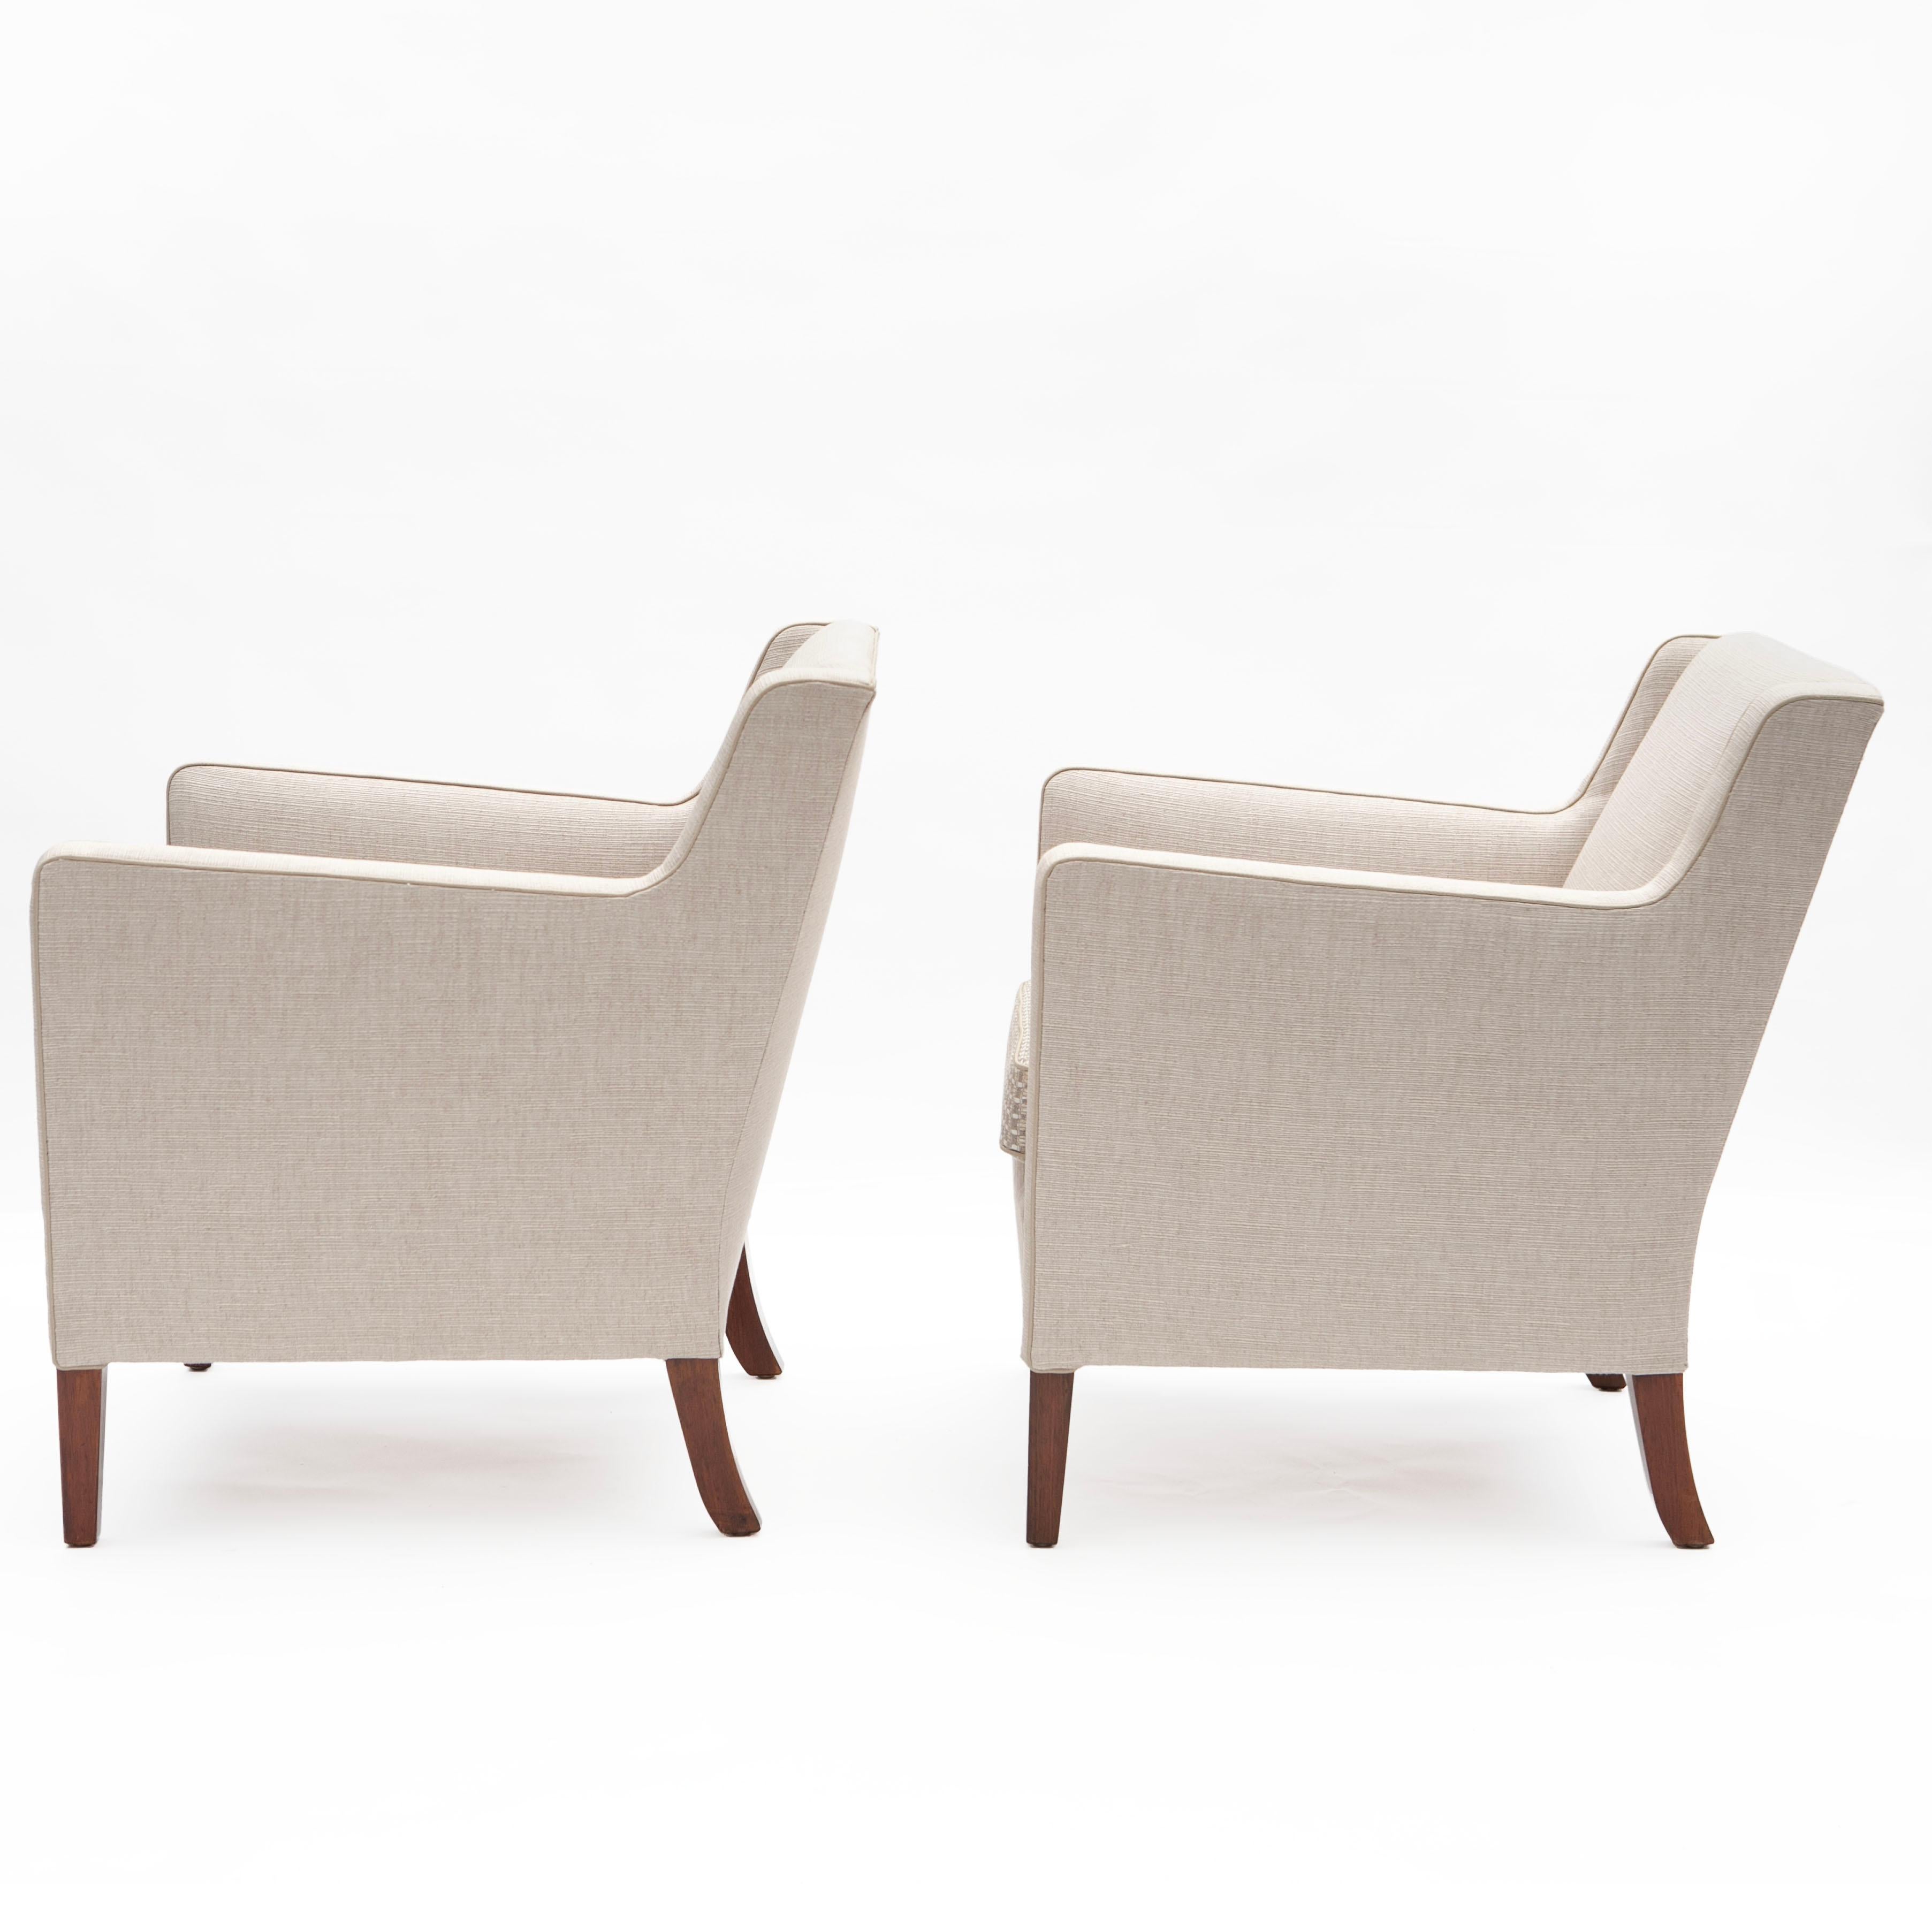 20th Century Pair of Frits Henningsen Lounge Chairs In Light Fabric. Denmark 1950's For Sale